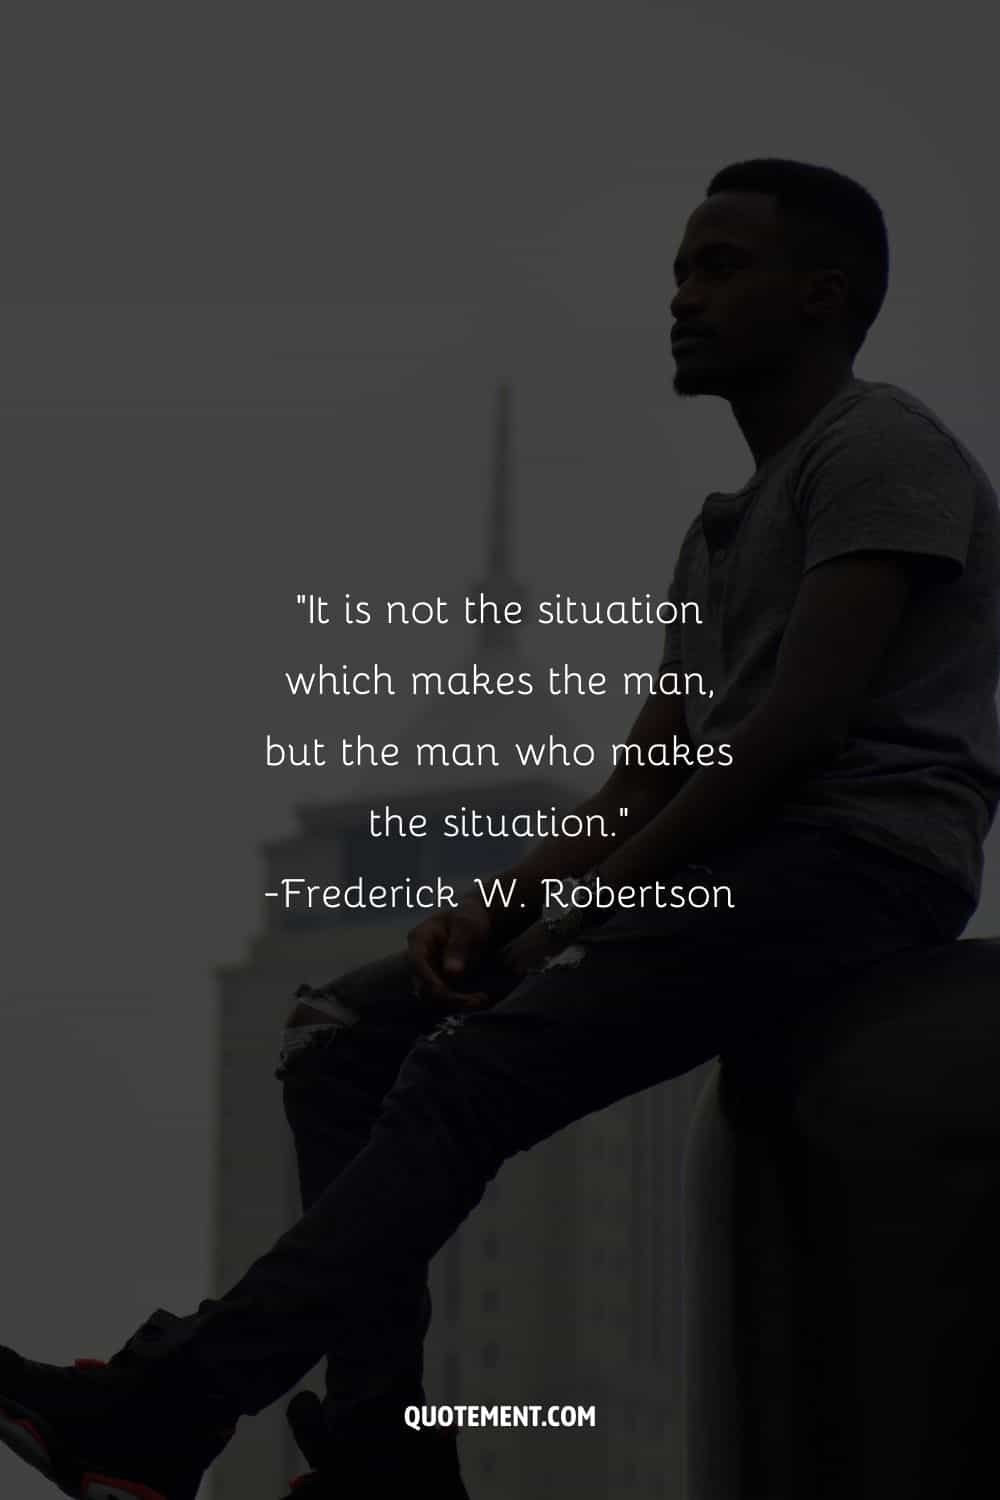 It is not the situation which makes the man, but the man who makes the situation